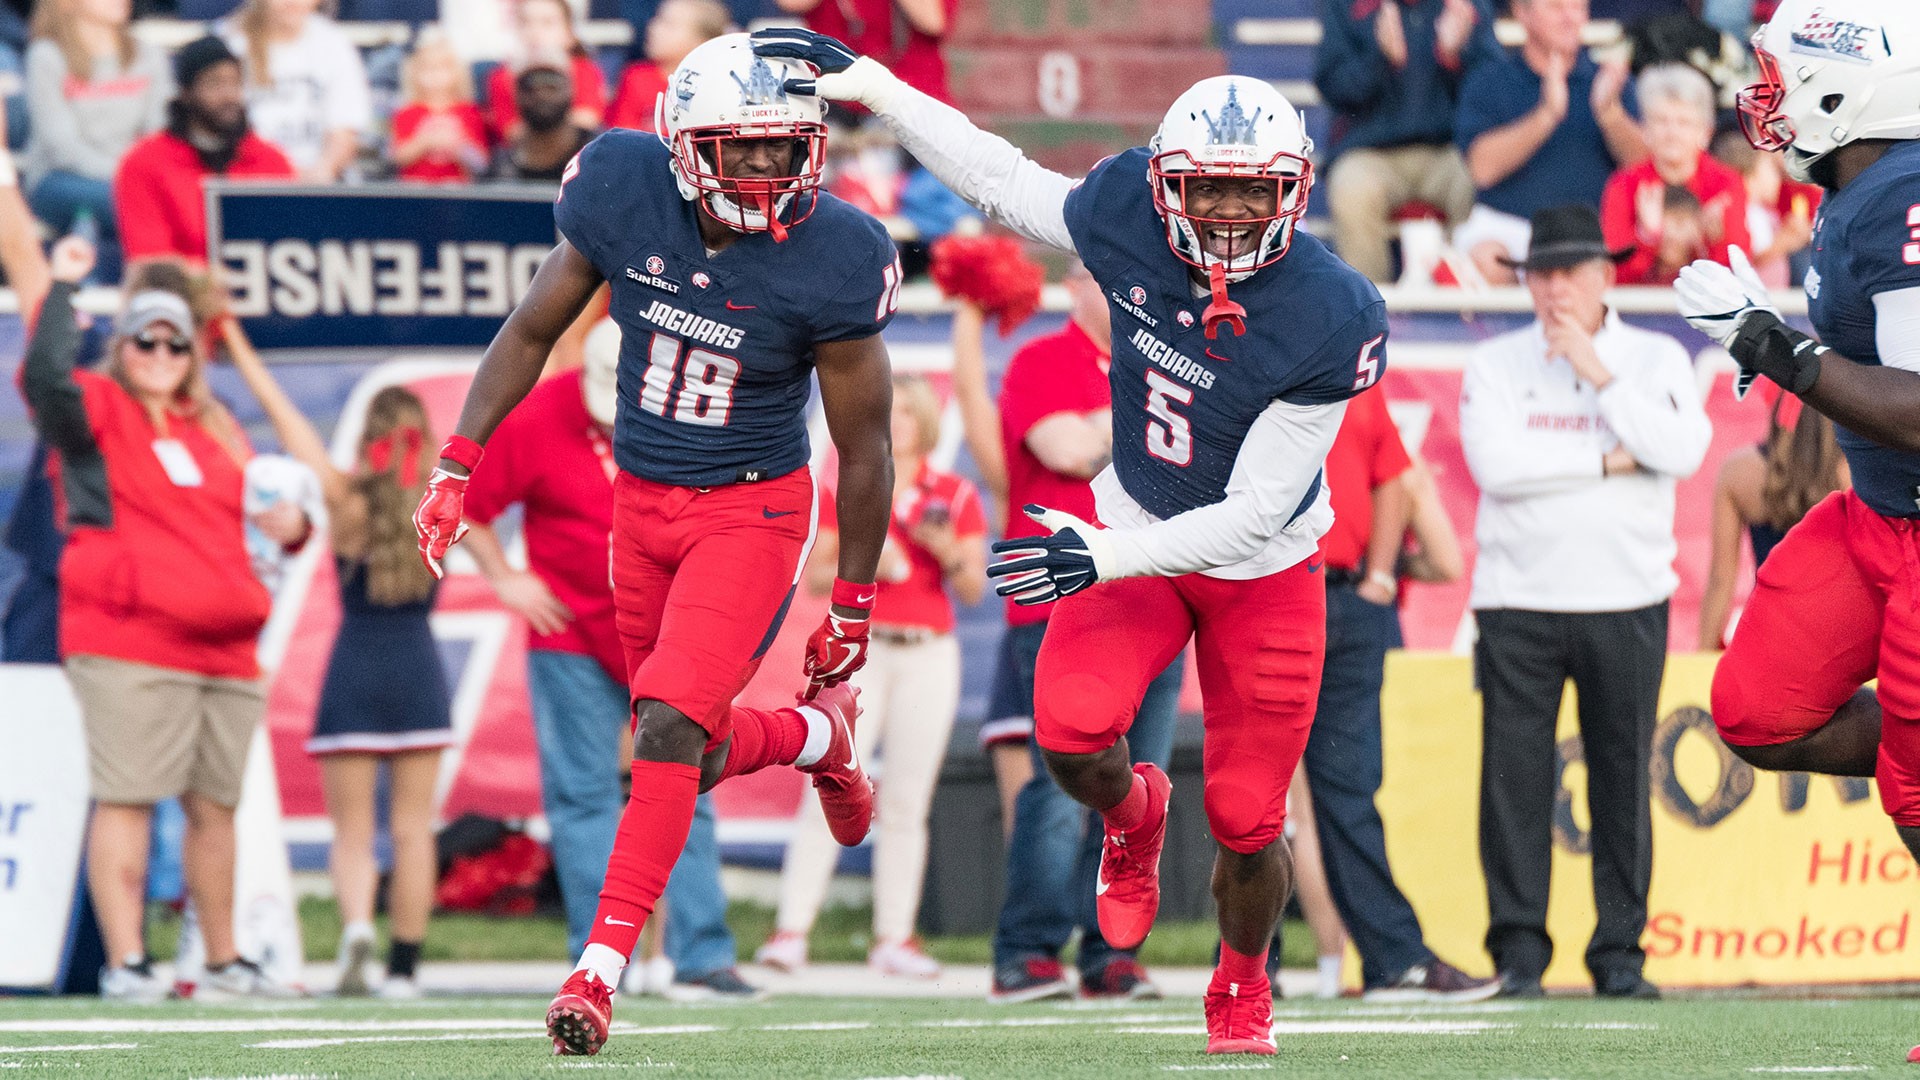 2018 SOUTH ALABAMA FOOTBALL SCHEDULE RELEASED